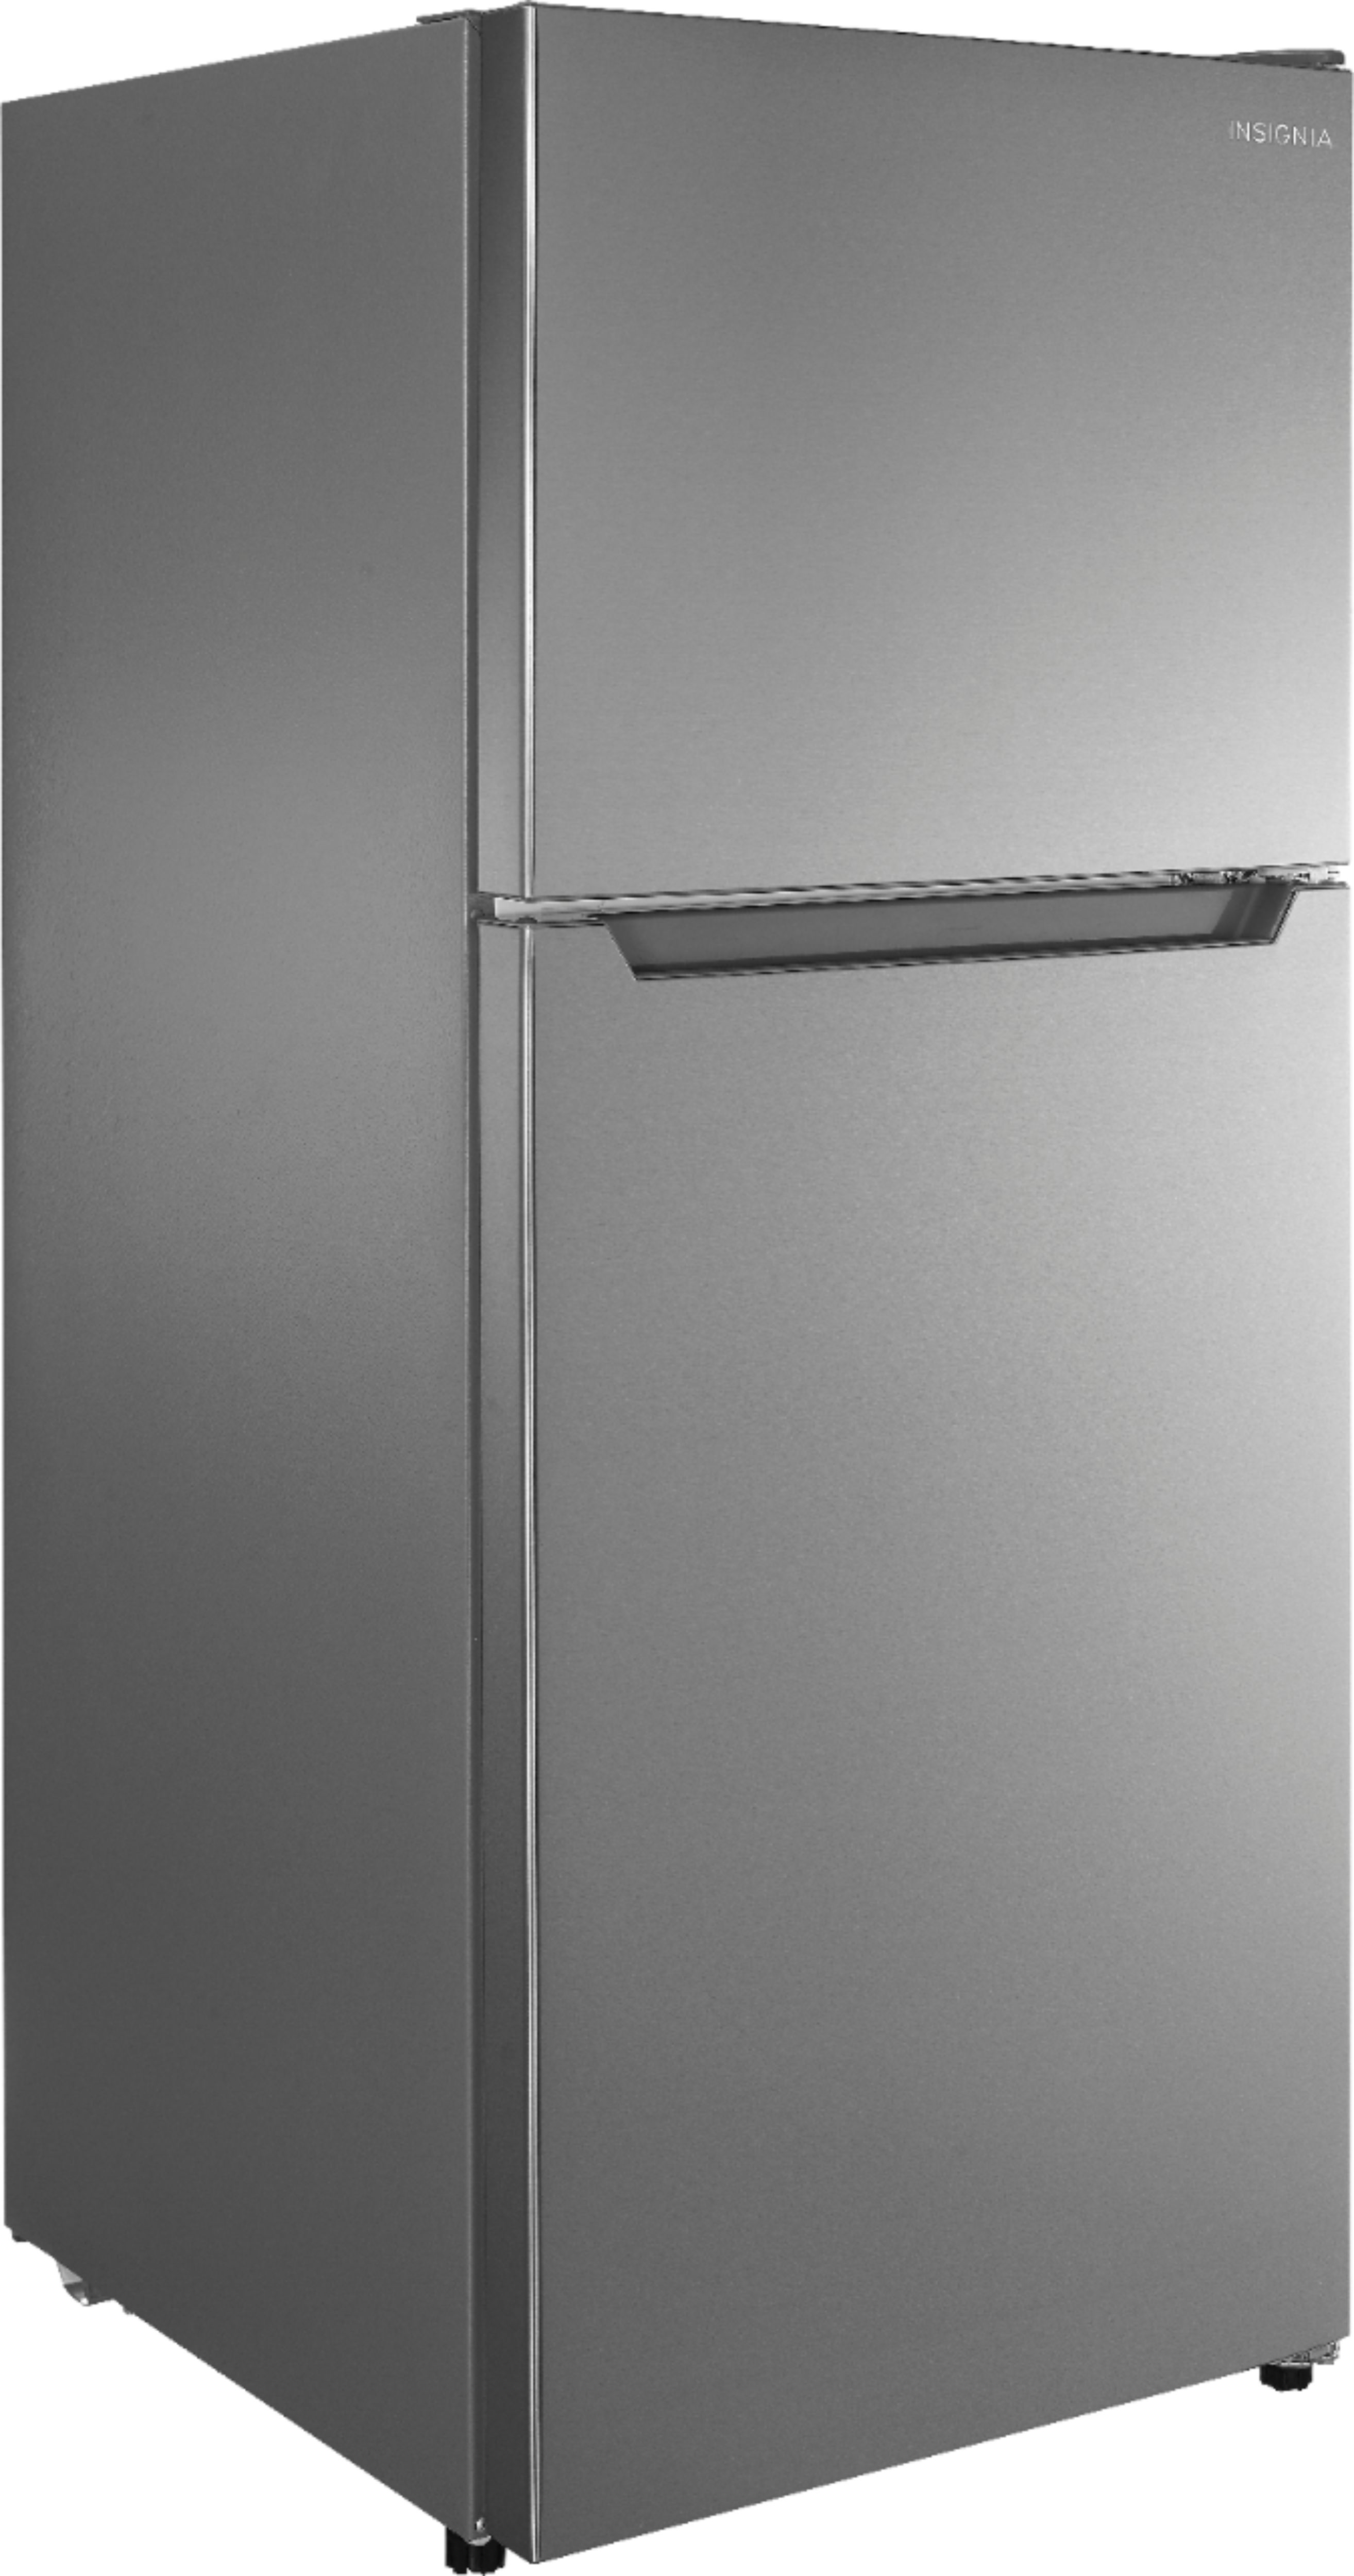 Angle View: Insignia™ - 10.5 Cu. Ft. Top-Freezer Refrigerator - Stainless Steel